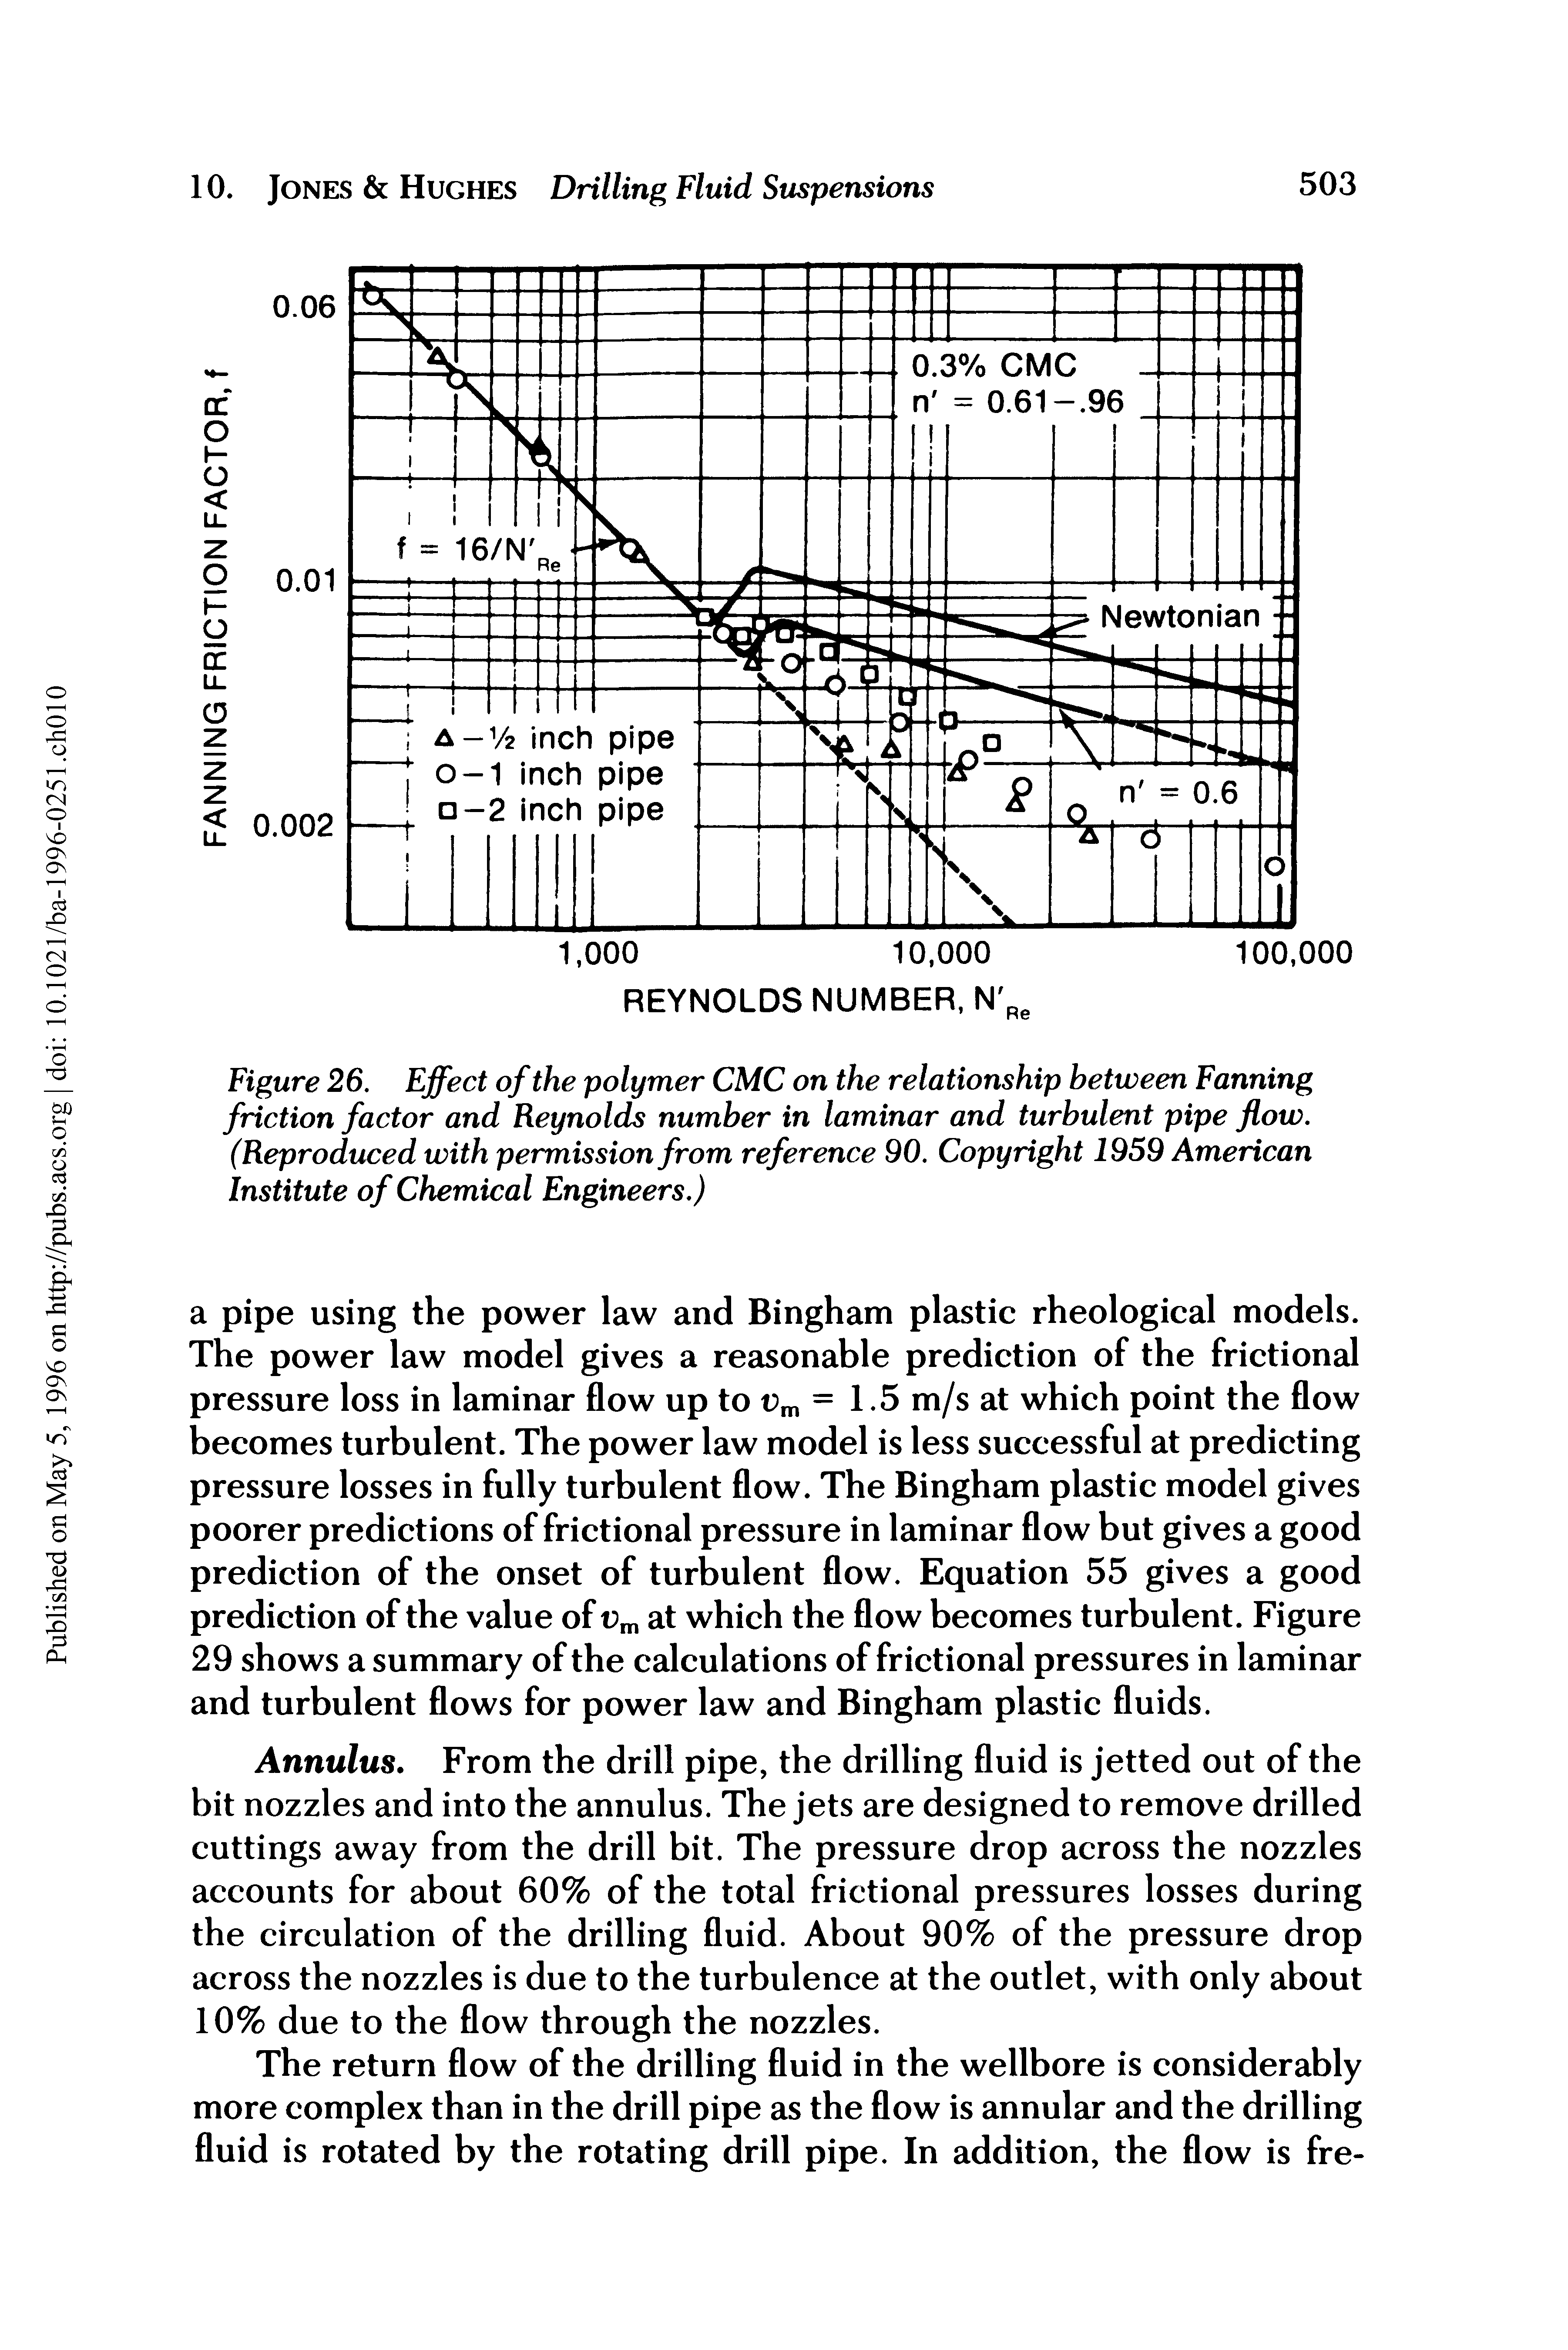 Figure 26. Effect of the polymer CMC on the relationship between Fanning friction factor and Reynolds number in laminar and turbulent pipe flow. (Reproduced with permission from reference 90. Copyright 1959 American Institute of Chemical Engineers.)...